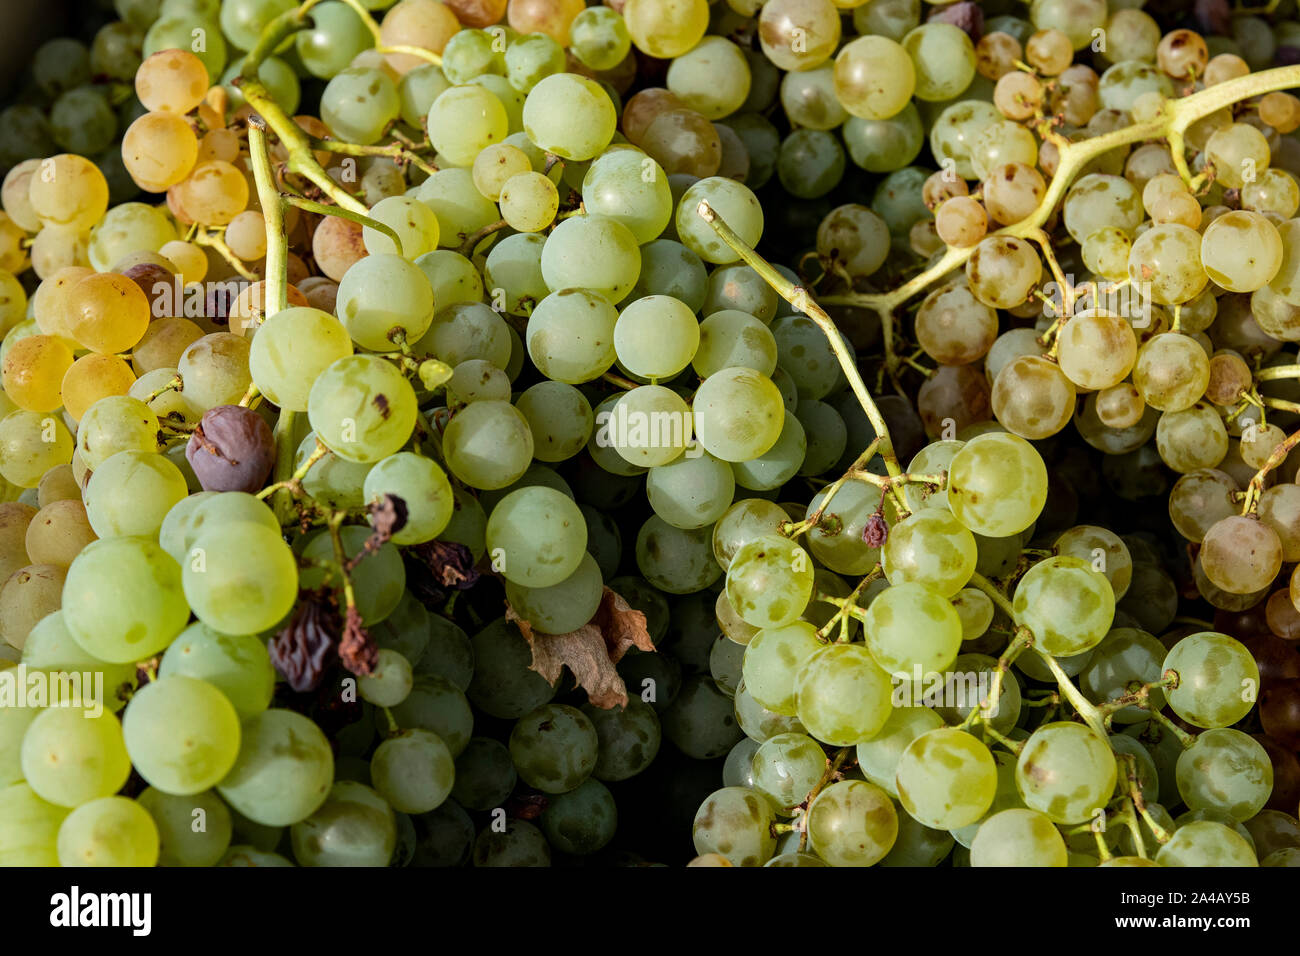 Clusters of white grapes collected from the vine to make wine. Stock Photo